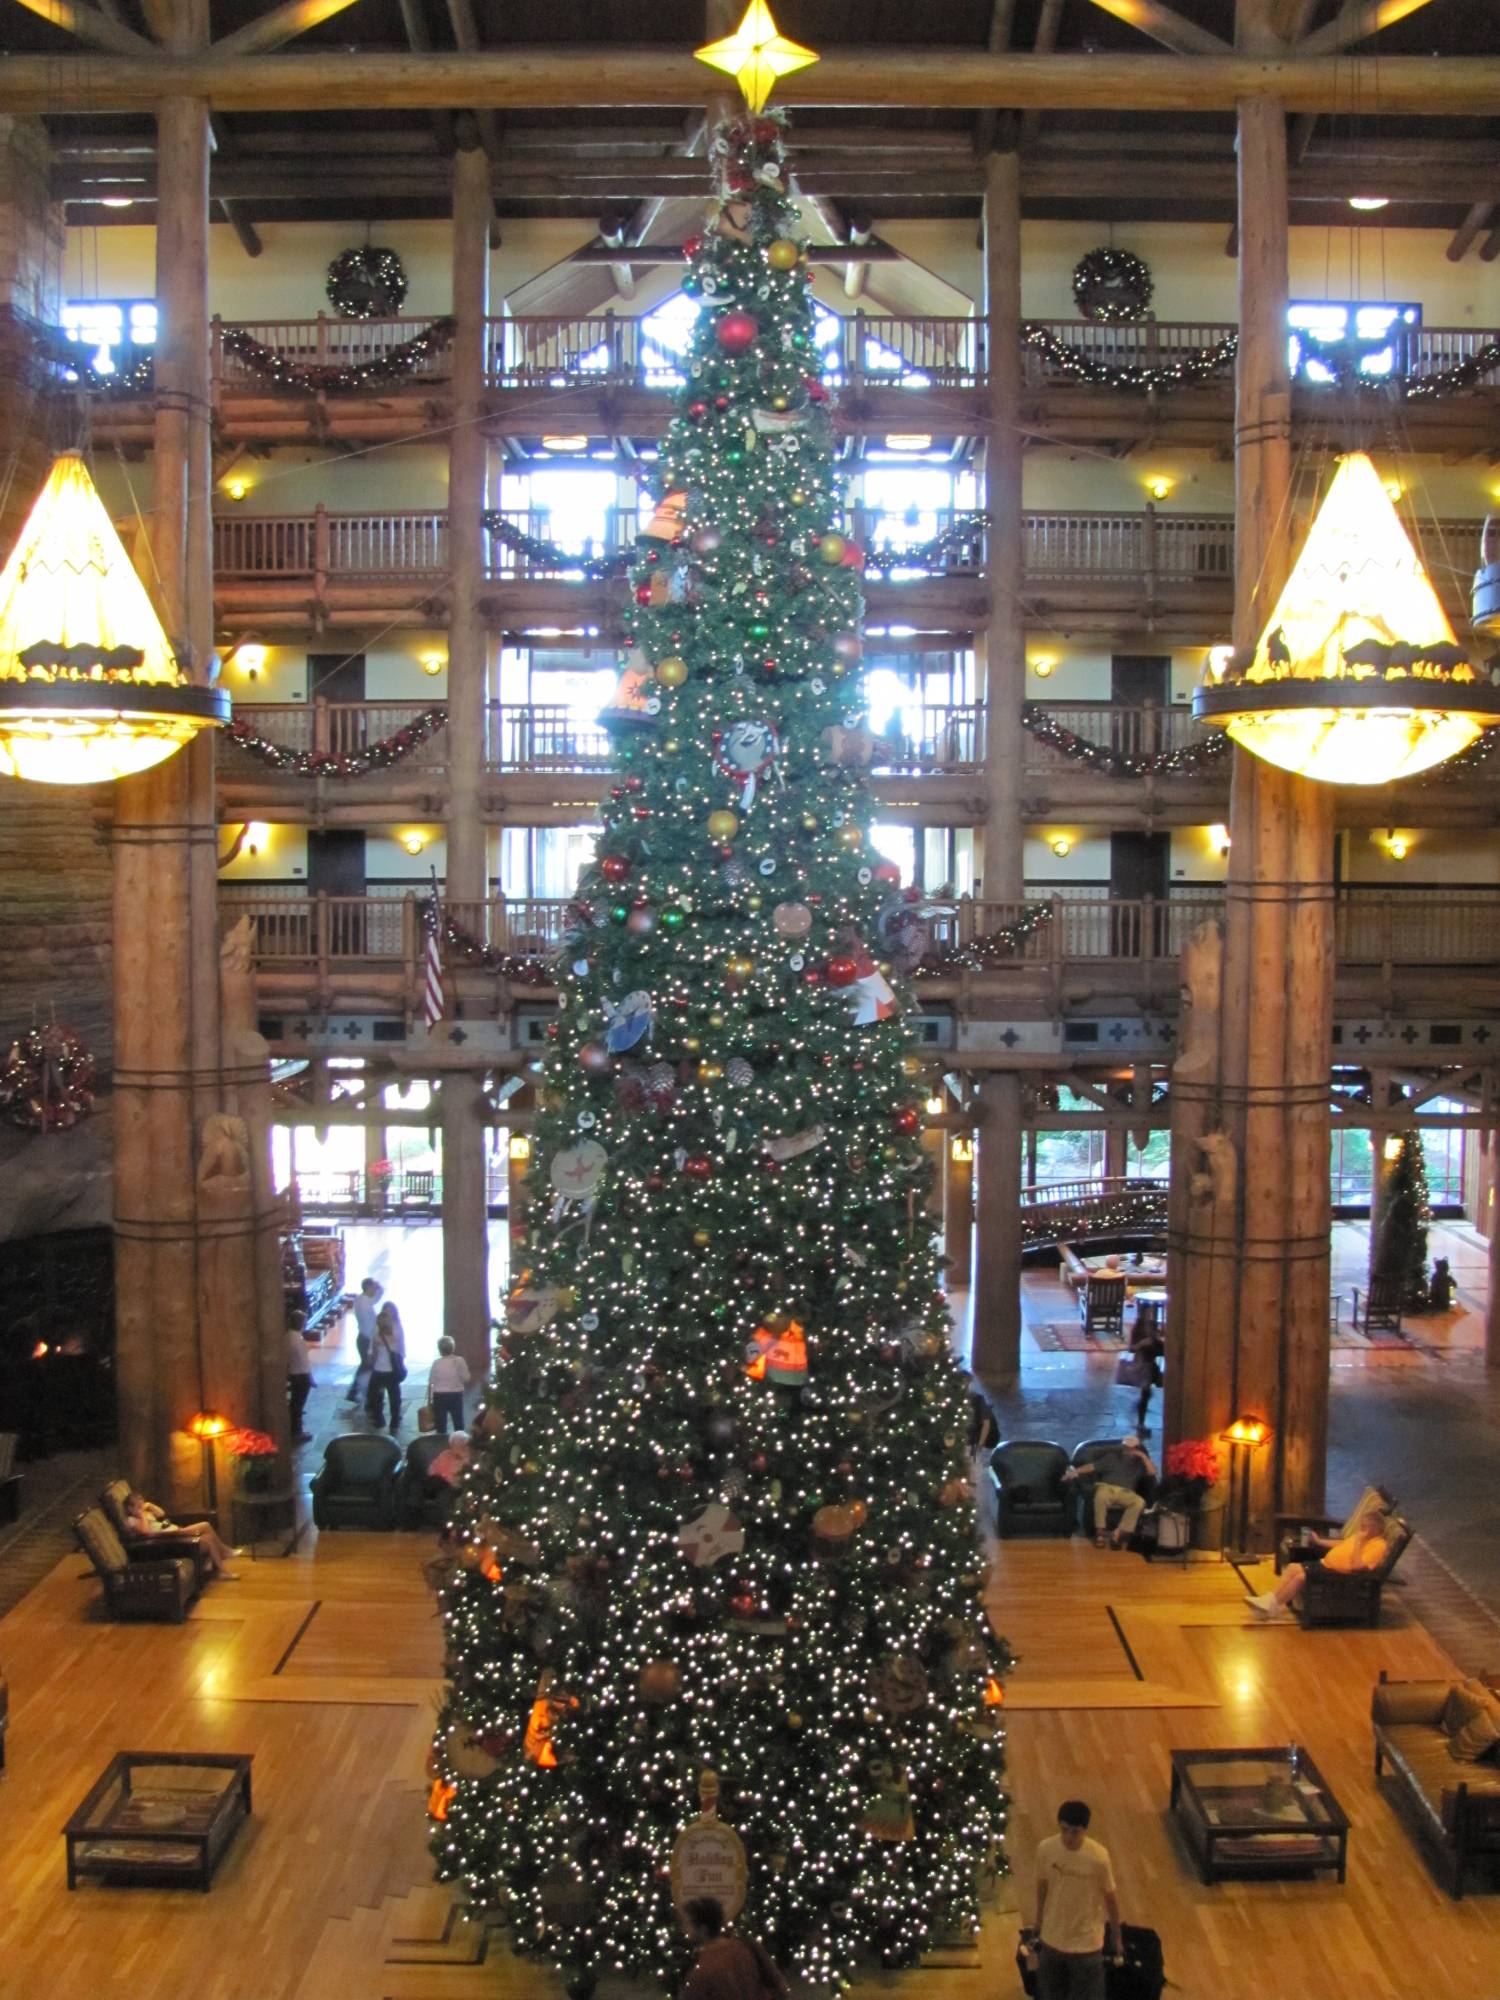 Wilderness Lodge at Christmas